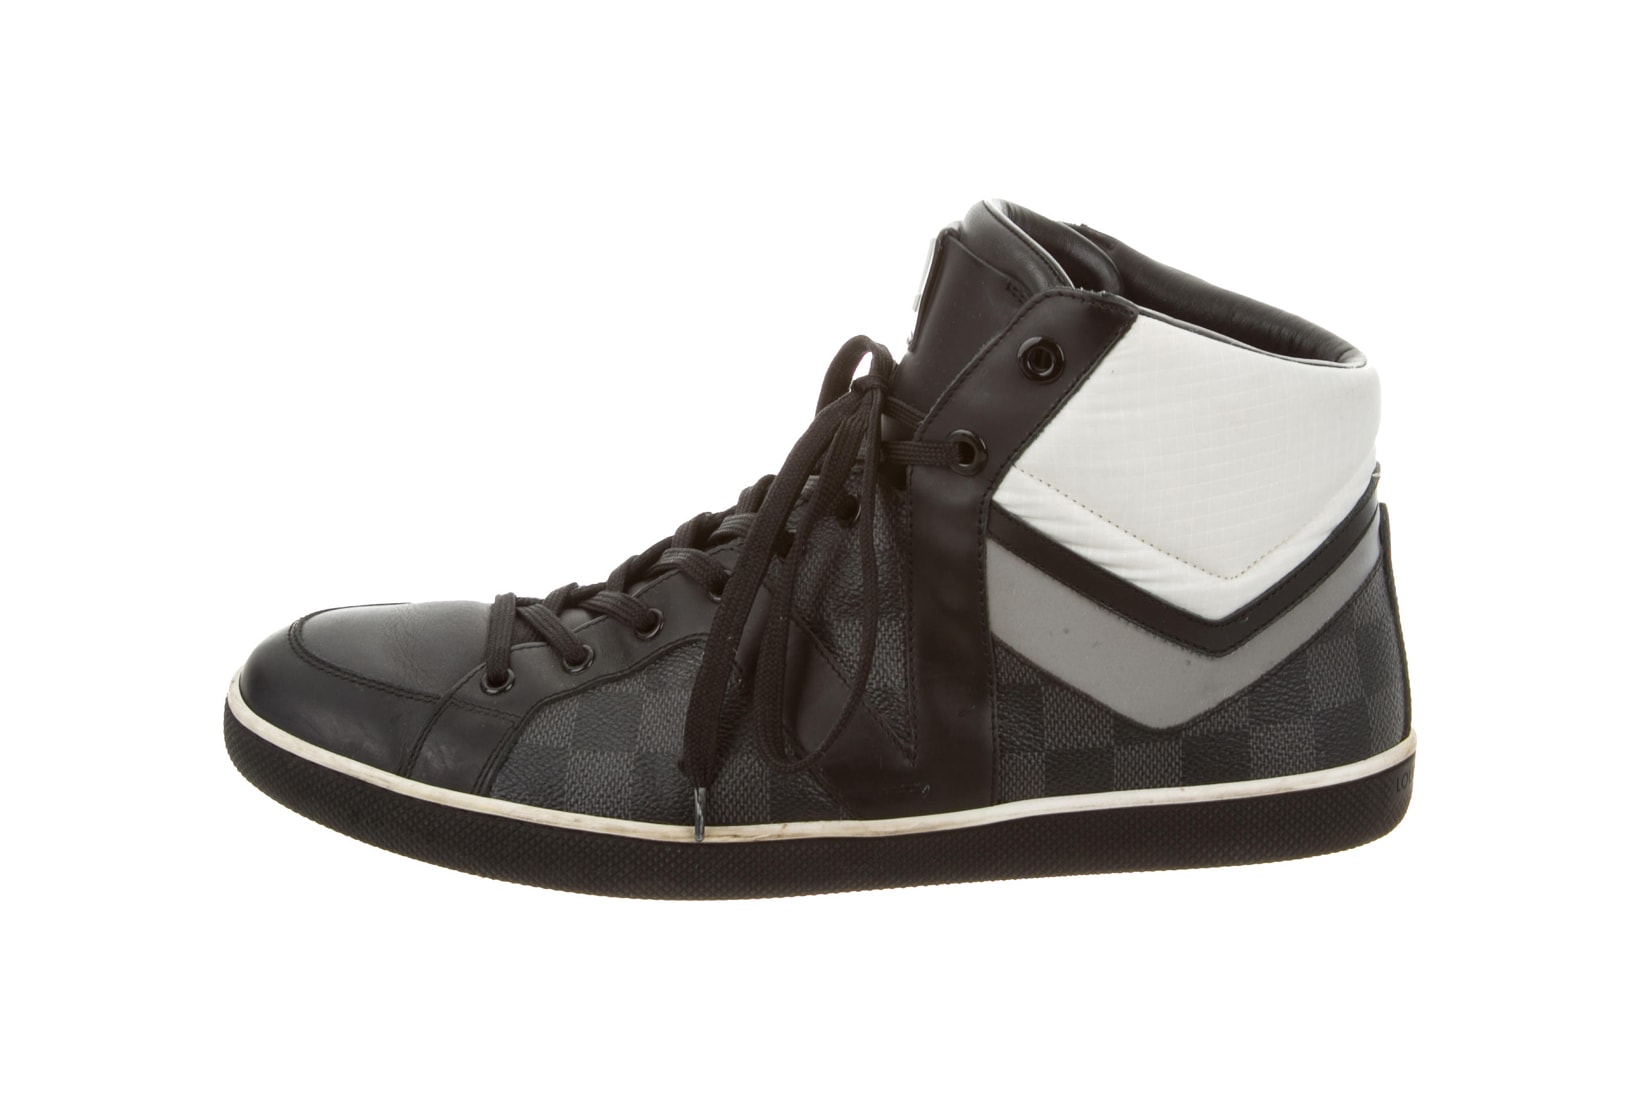 Louis Vuitton Damier High-Top Silicon Valley Reports Study The RealReal